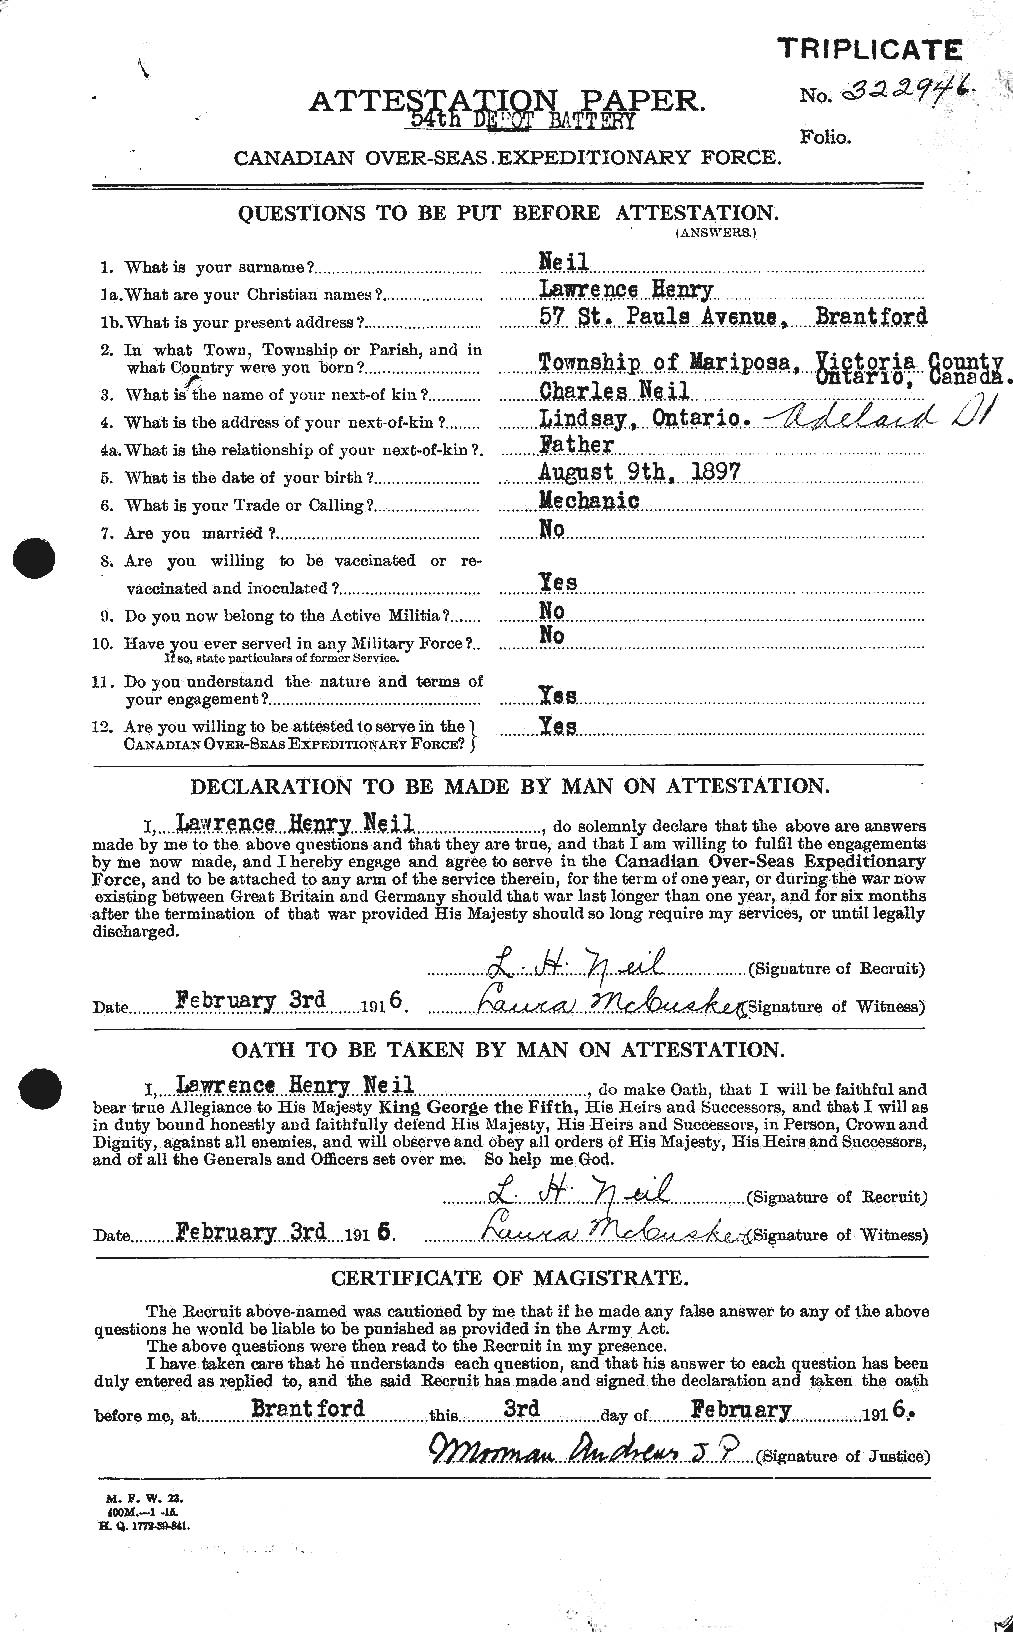 Personnel Records of the First World War - CEF 545612a